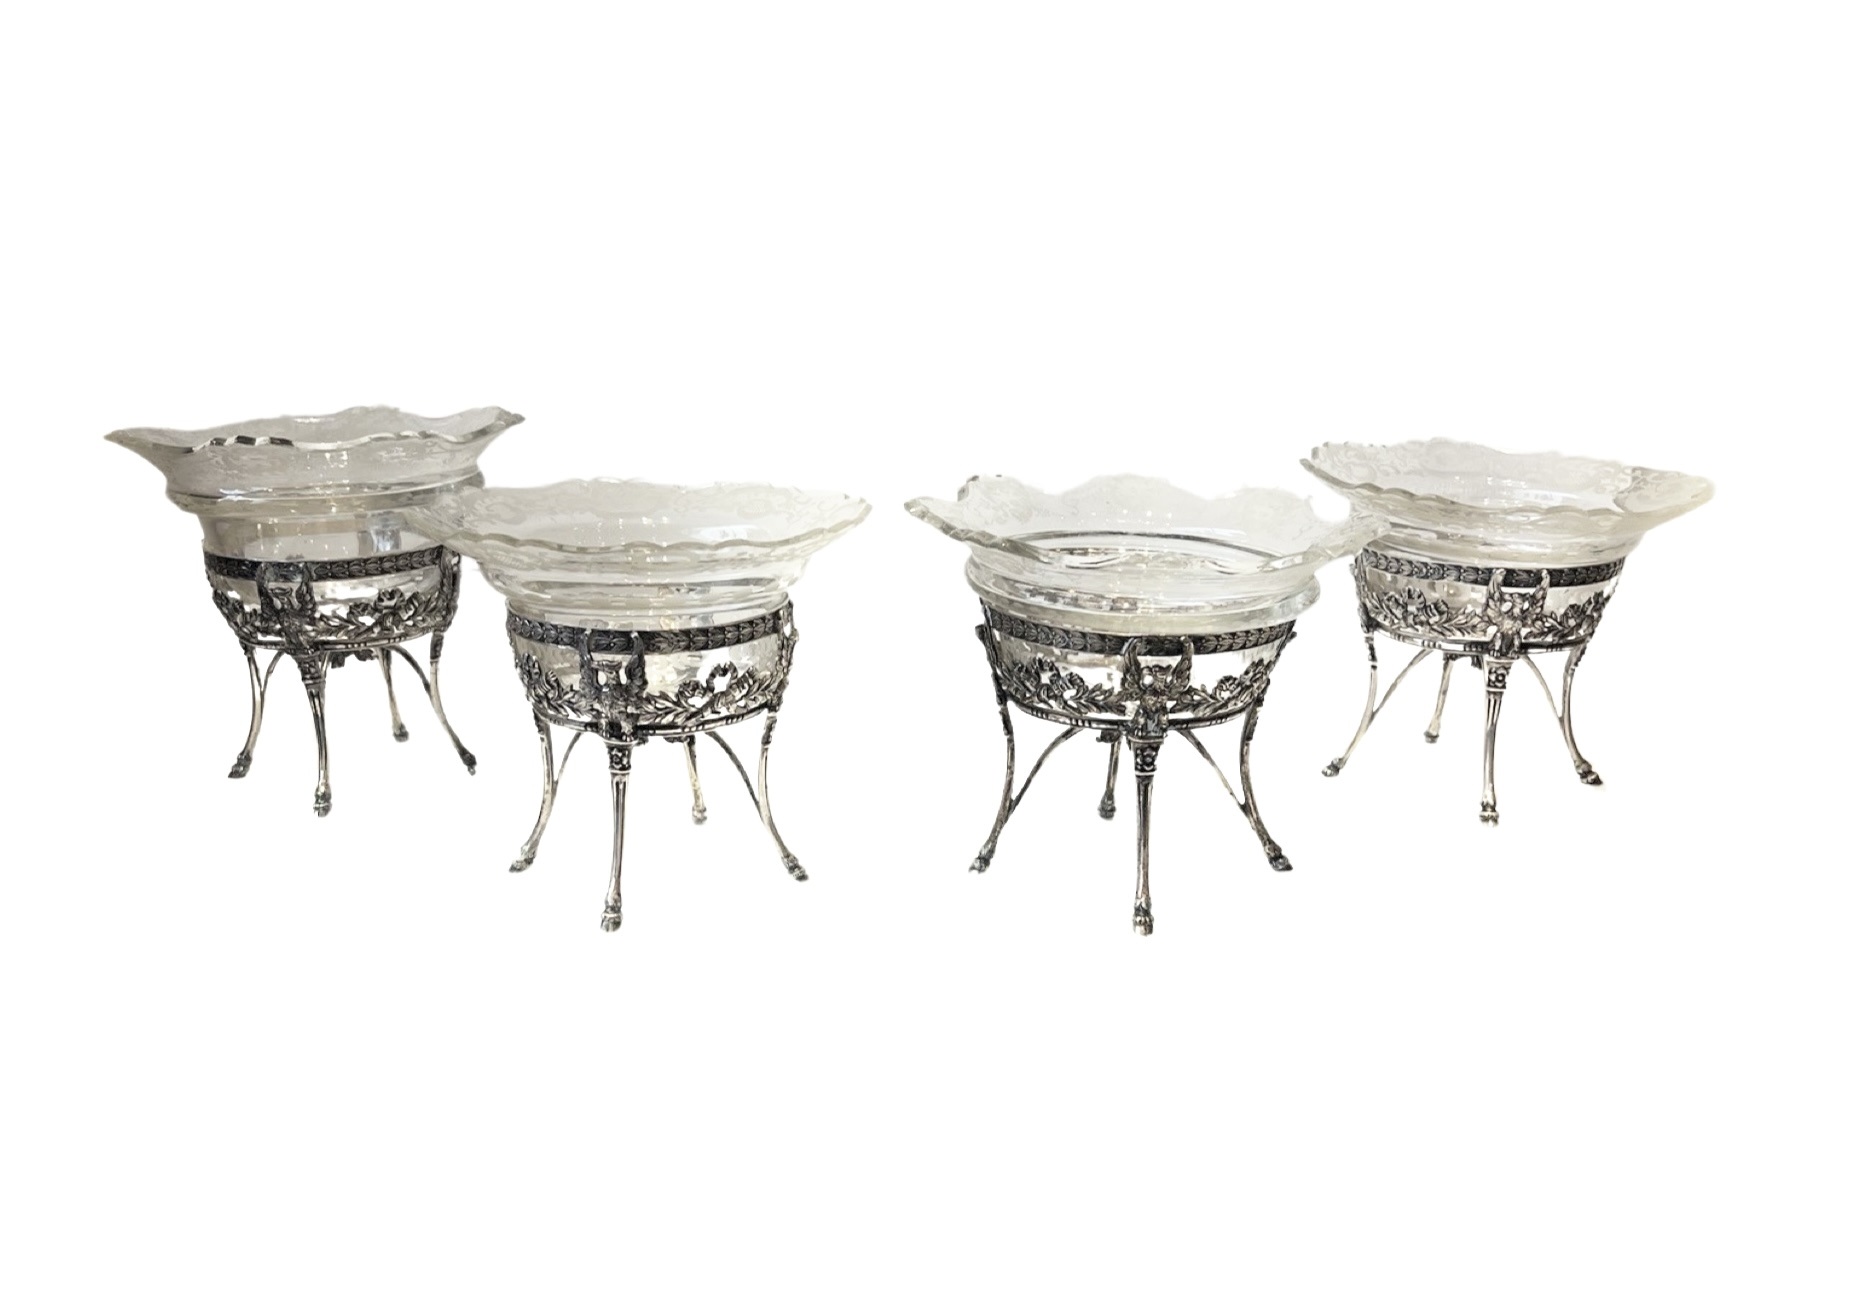 A SET OF FOUR SILVER AND CUT GLASS SWEETMEAT BASKETS, POSSIBLY GERMAN, C. 1860